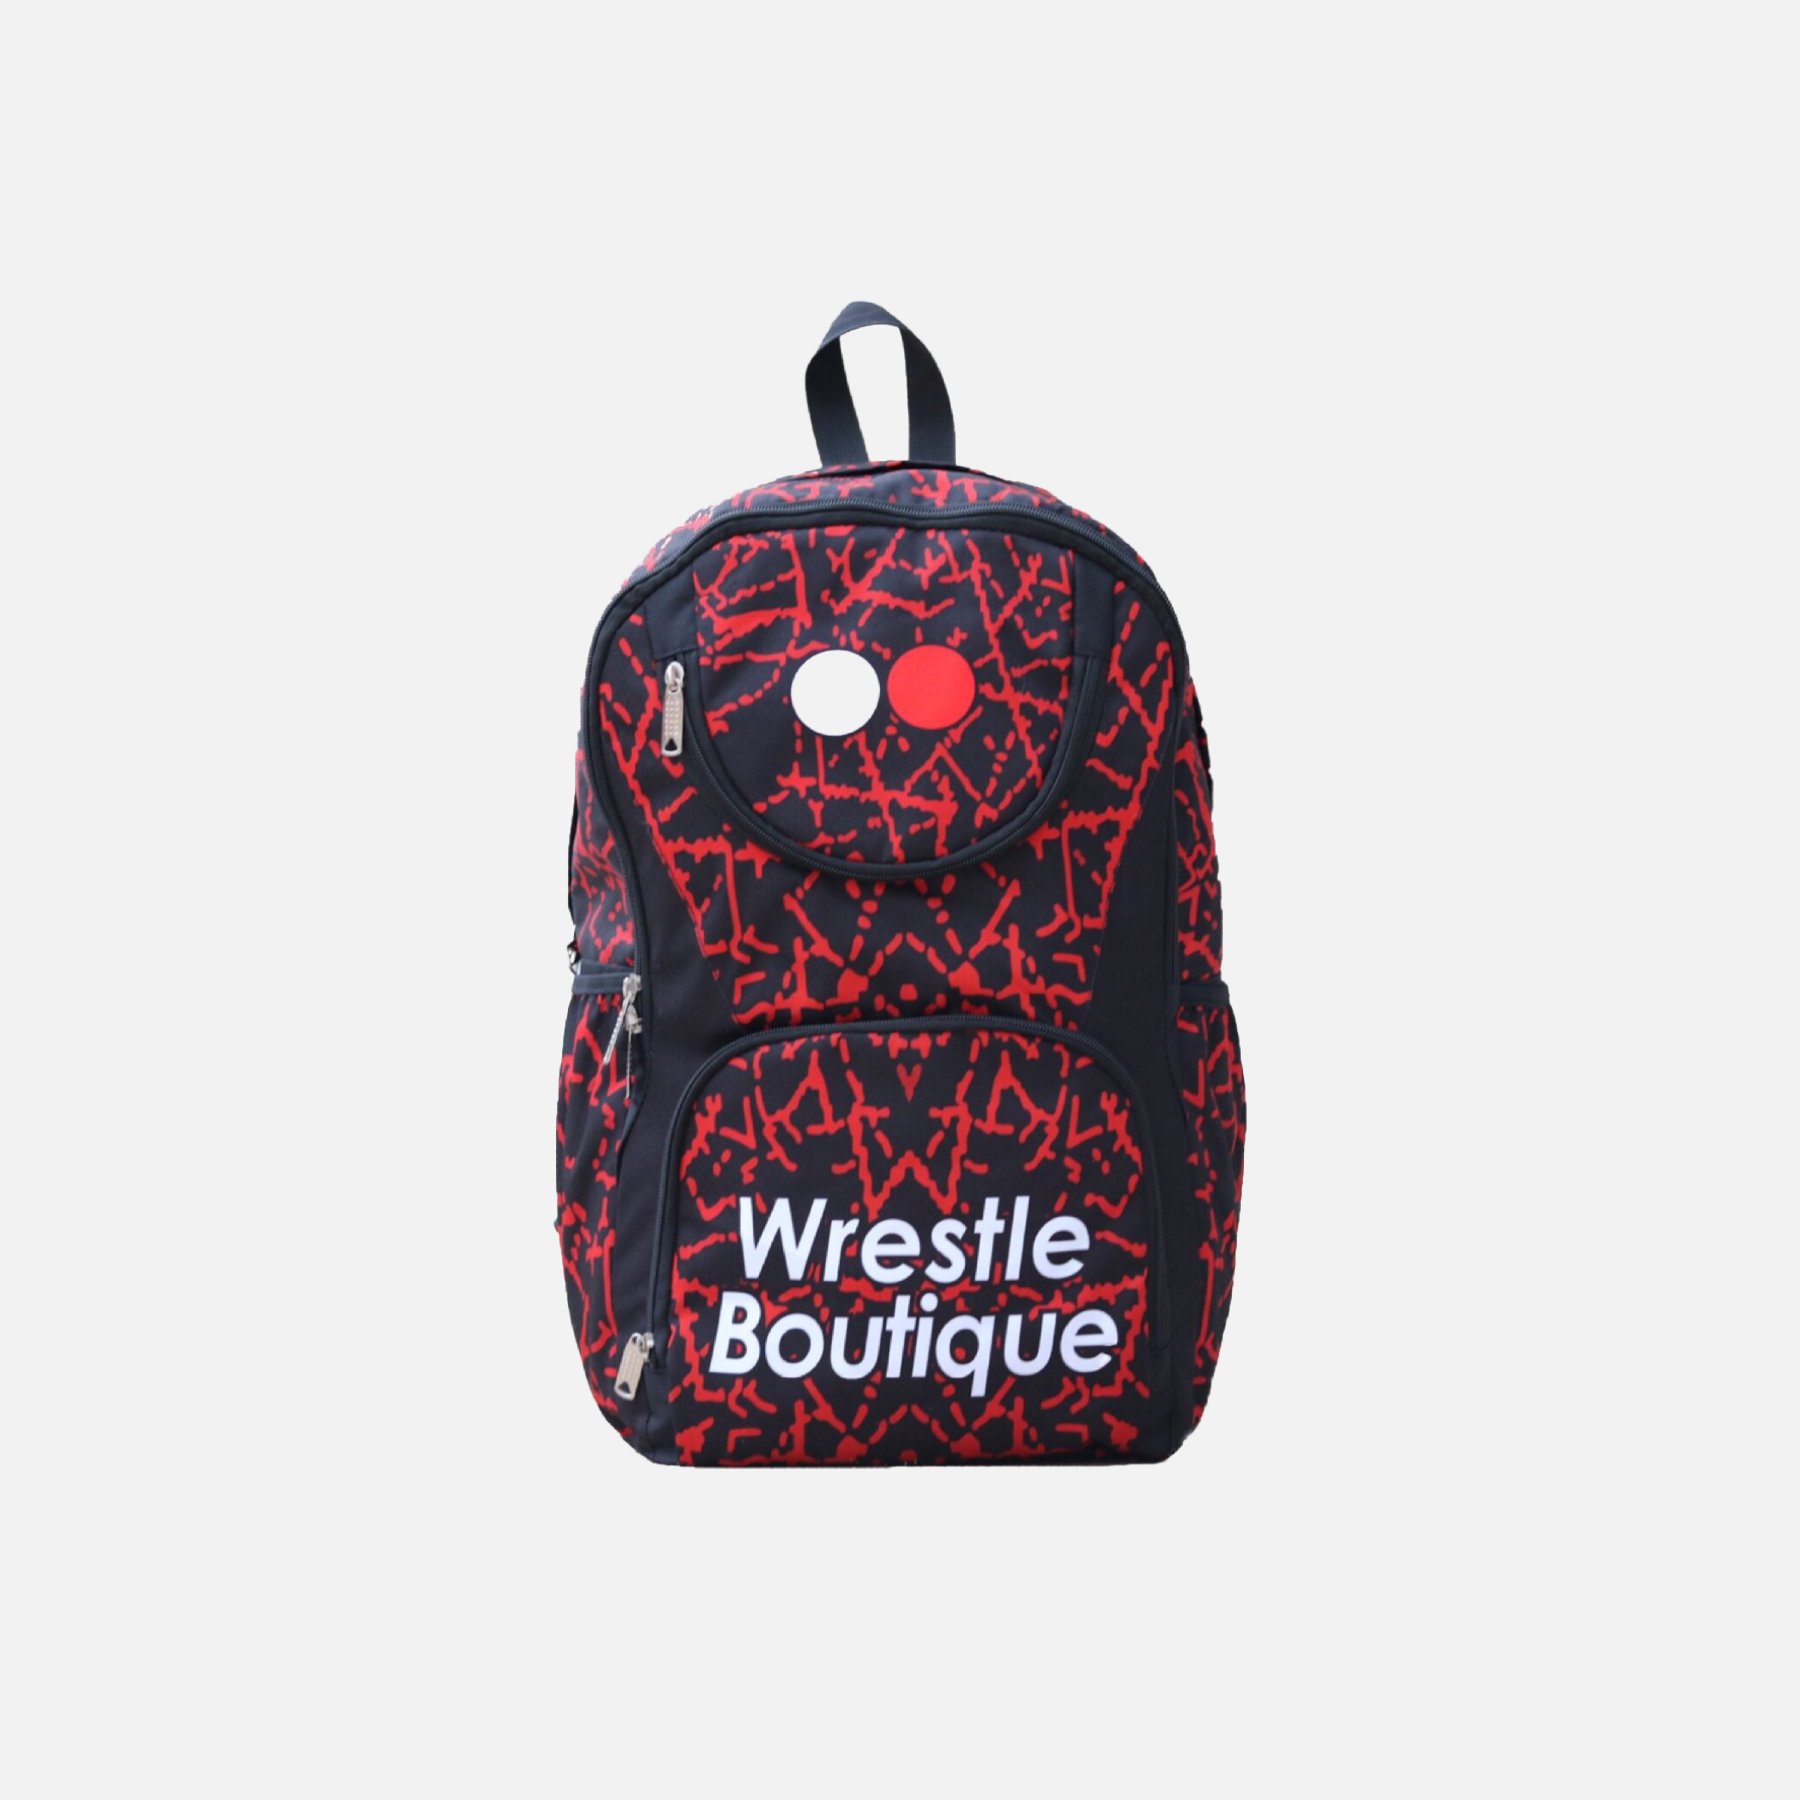 WB "Black Widow" Backpack - Wrestle Boutique